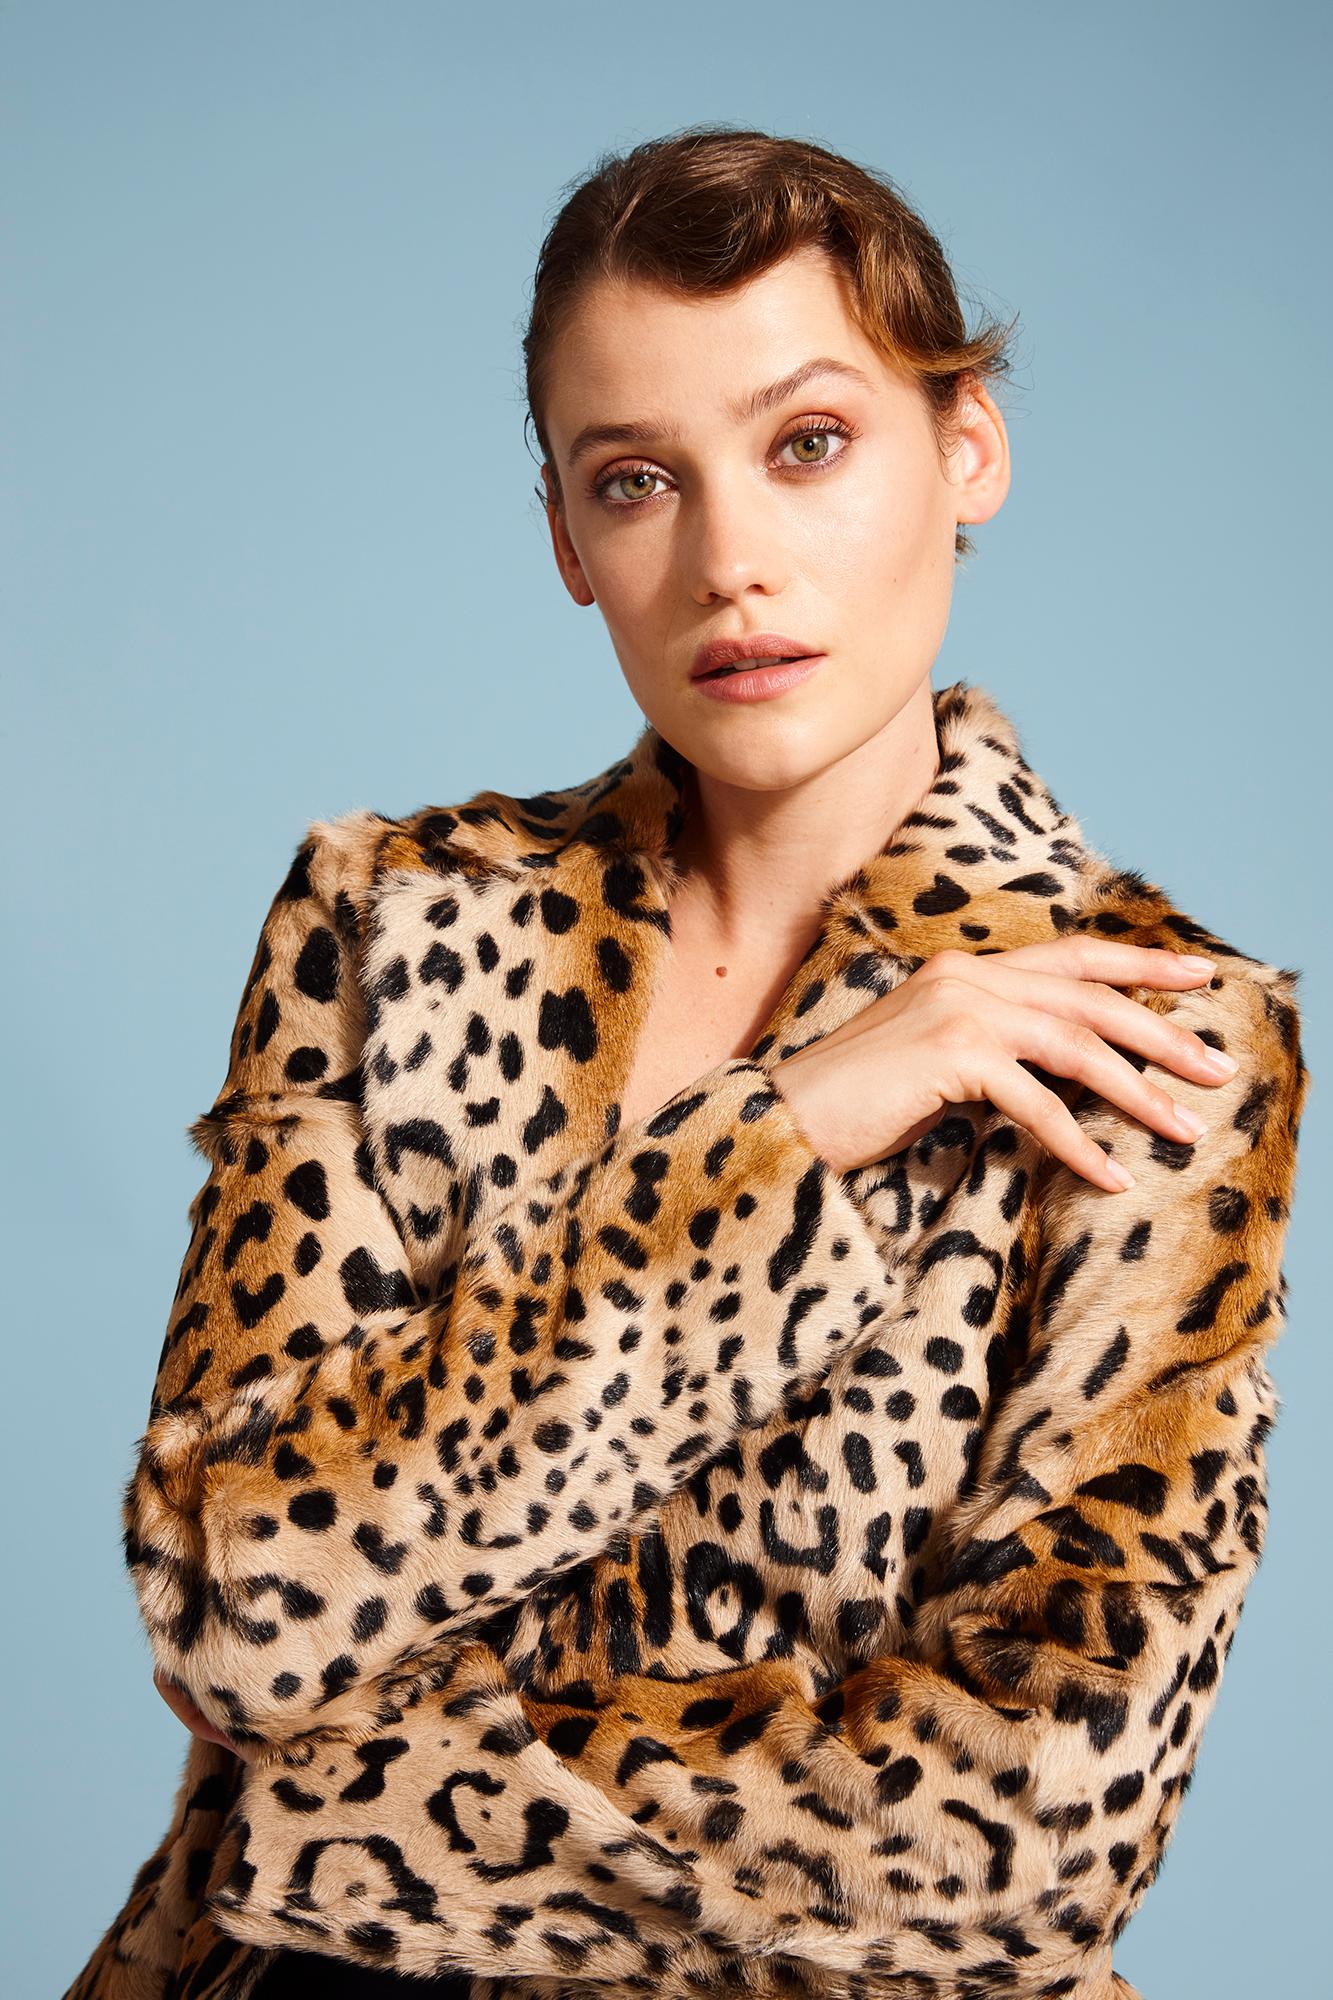 Verheyen London Leopard Print Coat in Natural Goat Hair Fur UK 10
RRP Price £1,695

This Leopard print coat is Verheyen London’s classic staple for effortless style and glamour.
A coat for dressing up and down with jeans or a dress.

PRODUCT